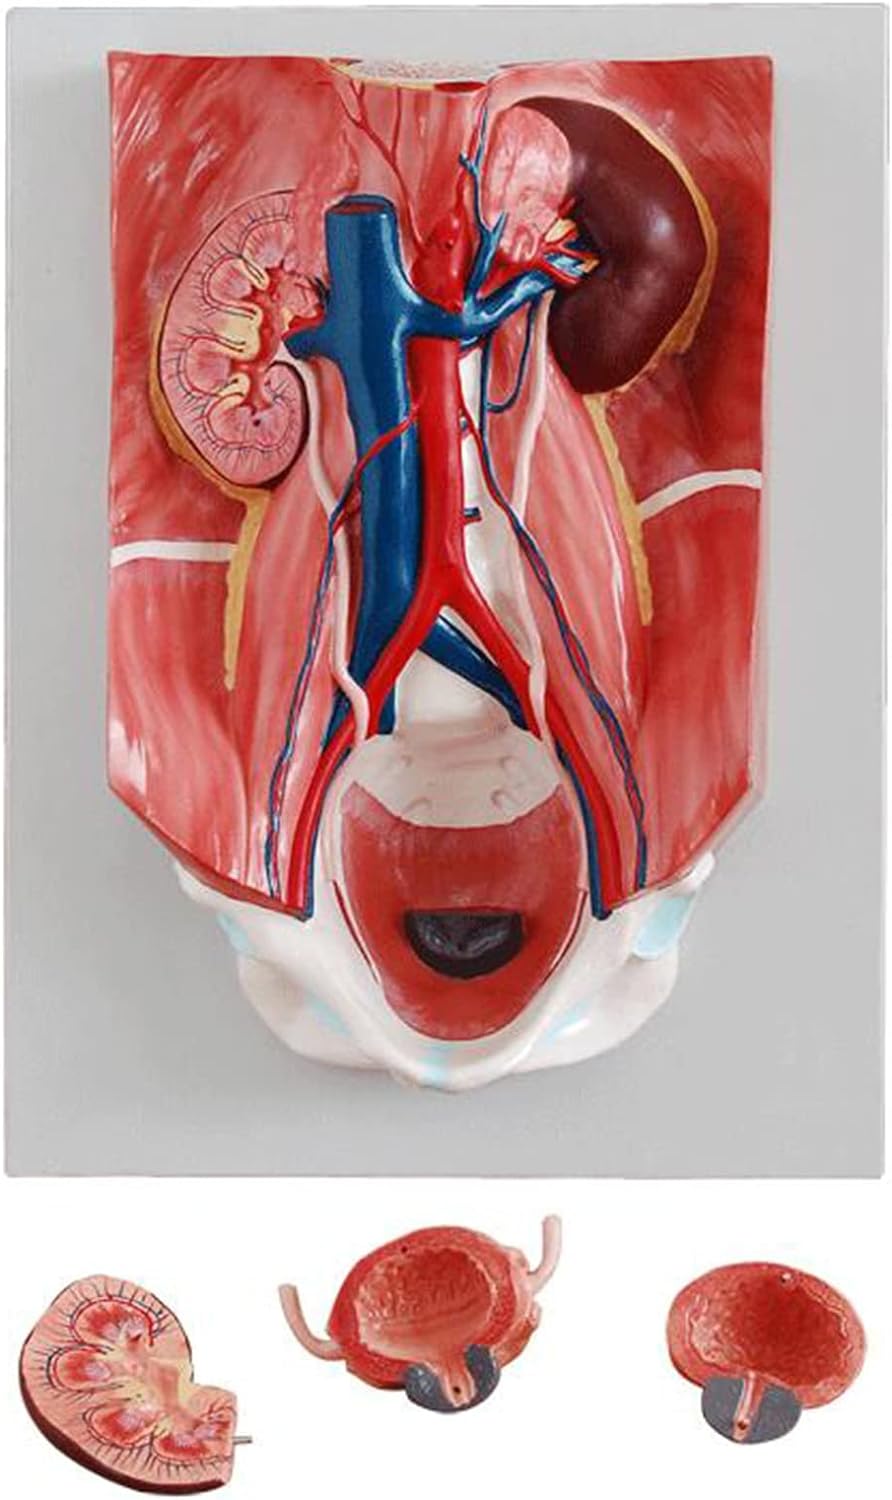 Human Urinary System Model – Human Vesicoureteral Vascular Teaching Model – Kidney Organs Structure Anatomy Model for Medical Education and Learning